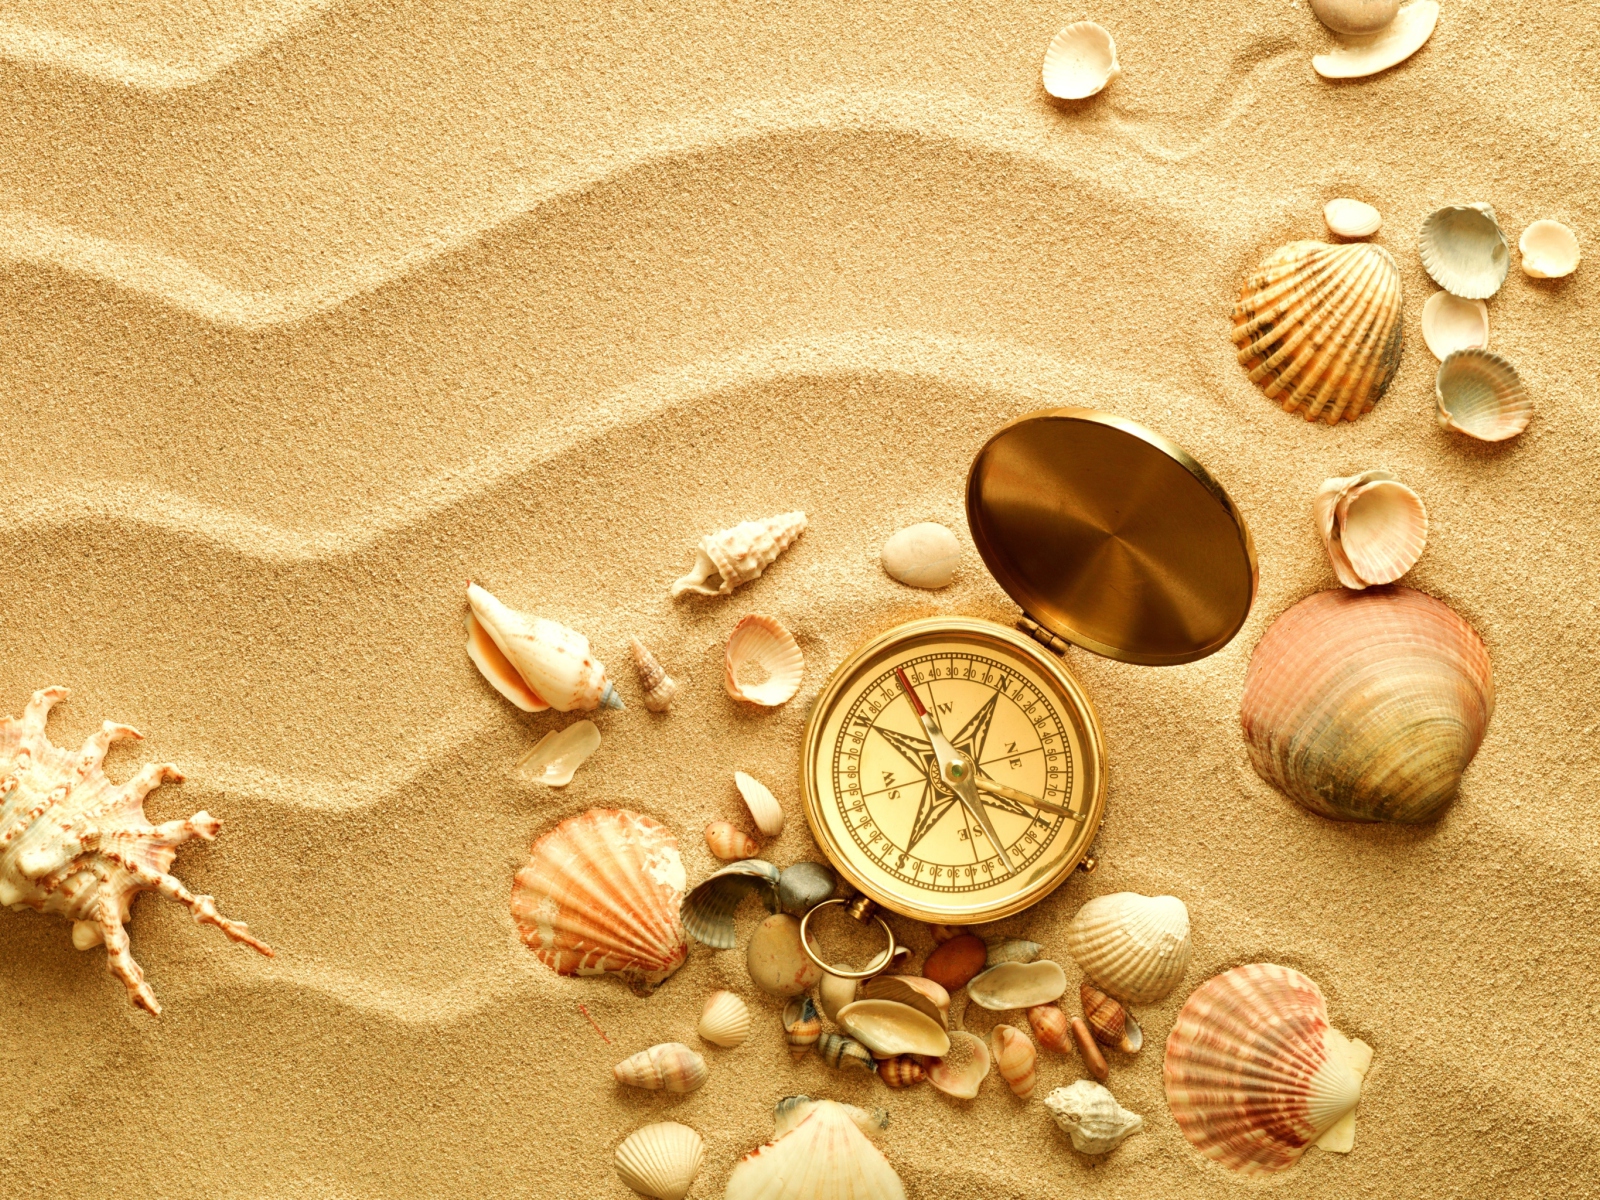 Compass And Shells On Sand wallpaper 1600x1200